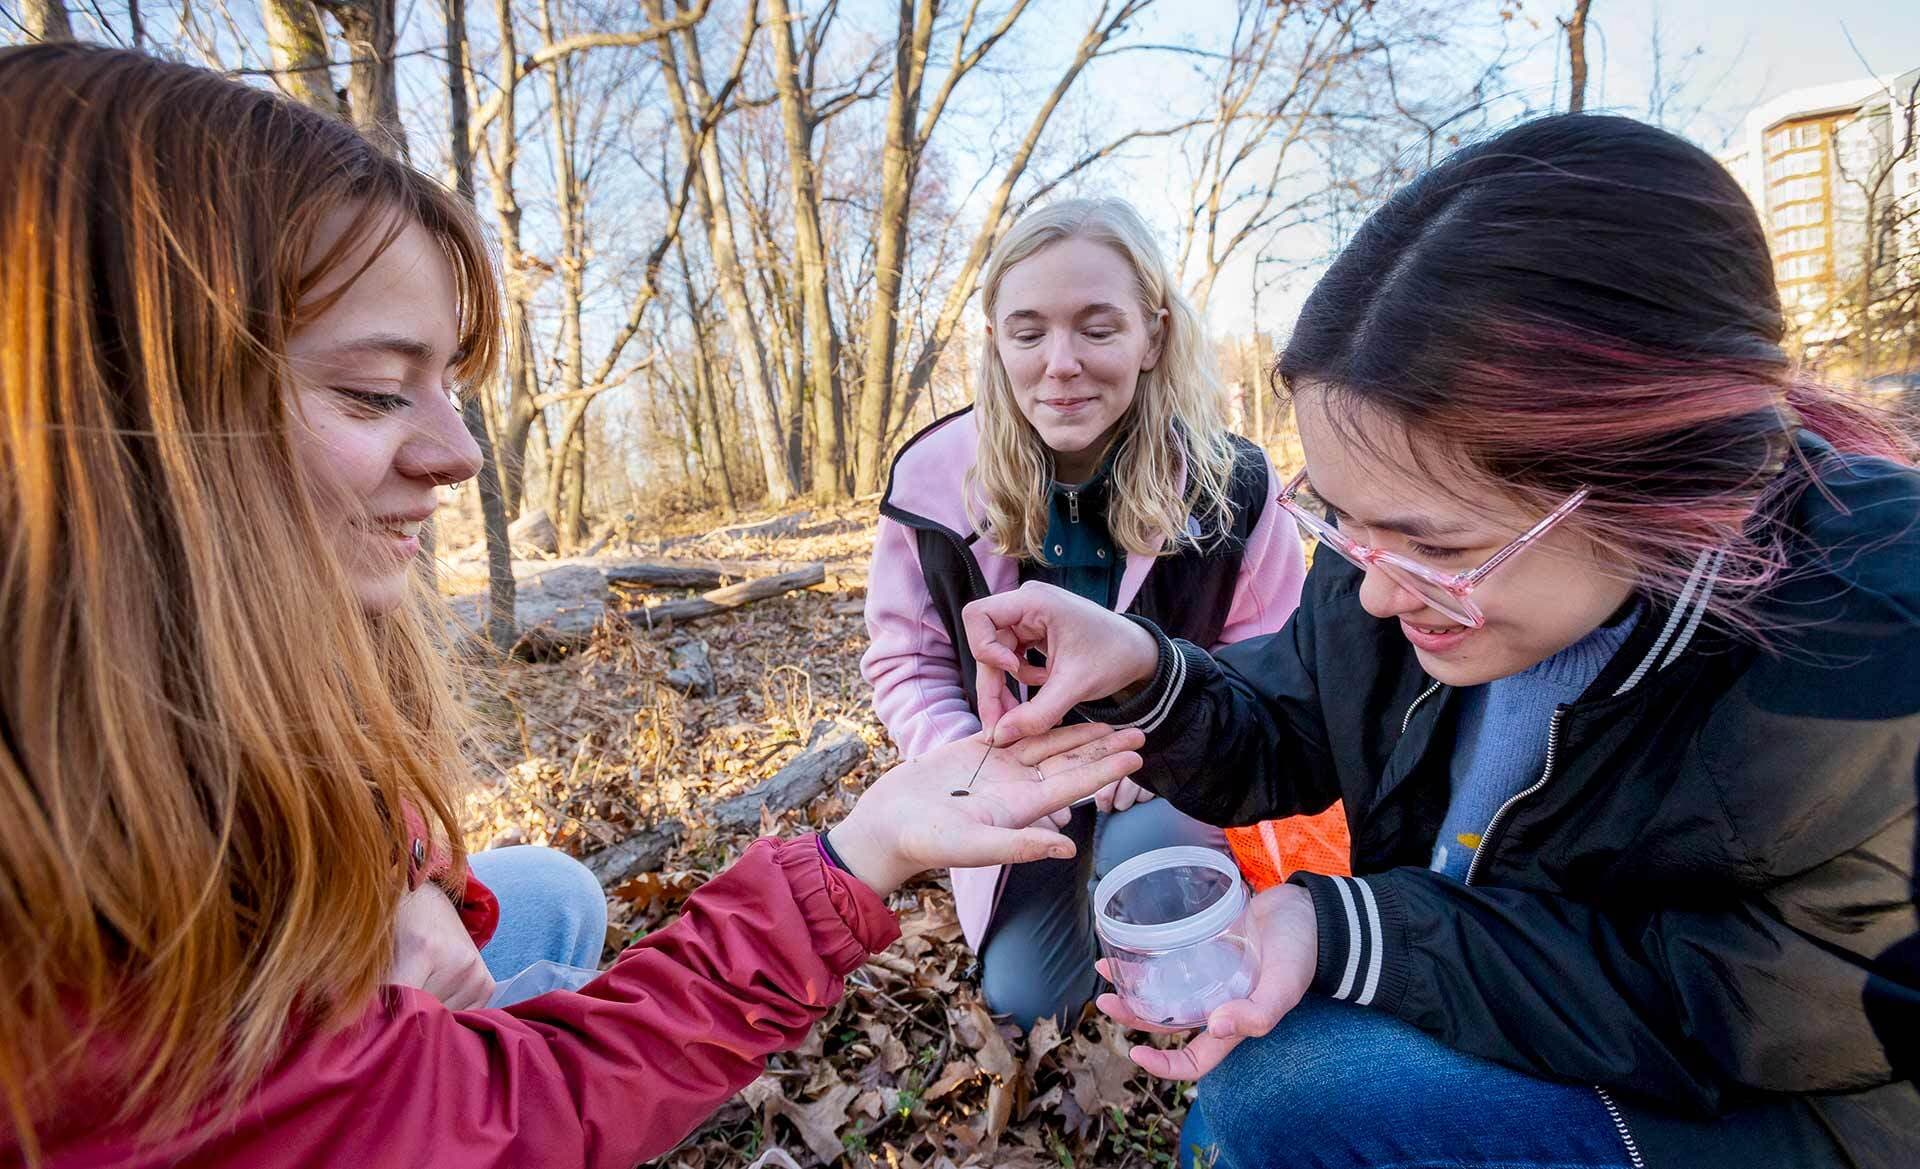 Students examine a bug in a girl's hand in the woods